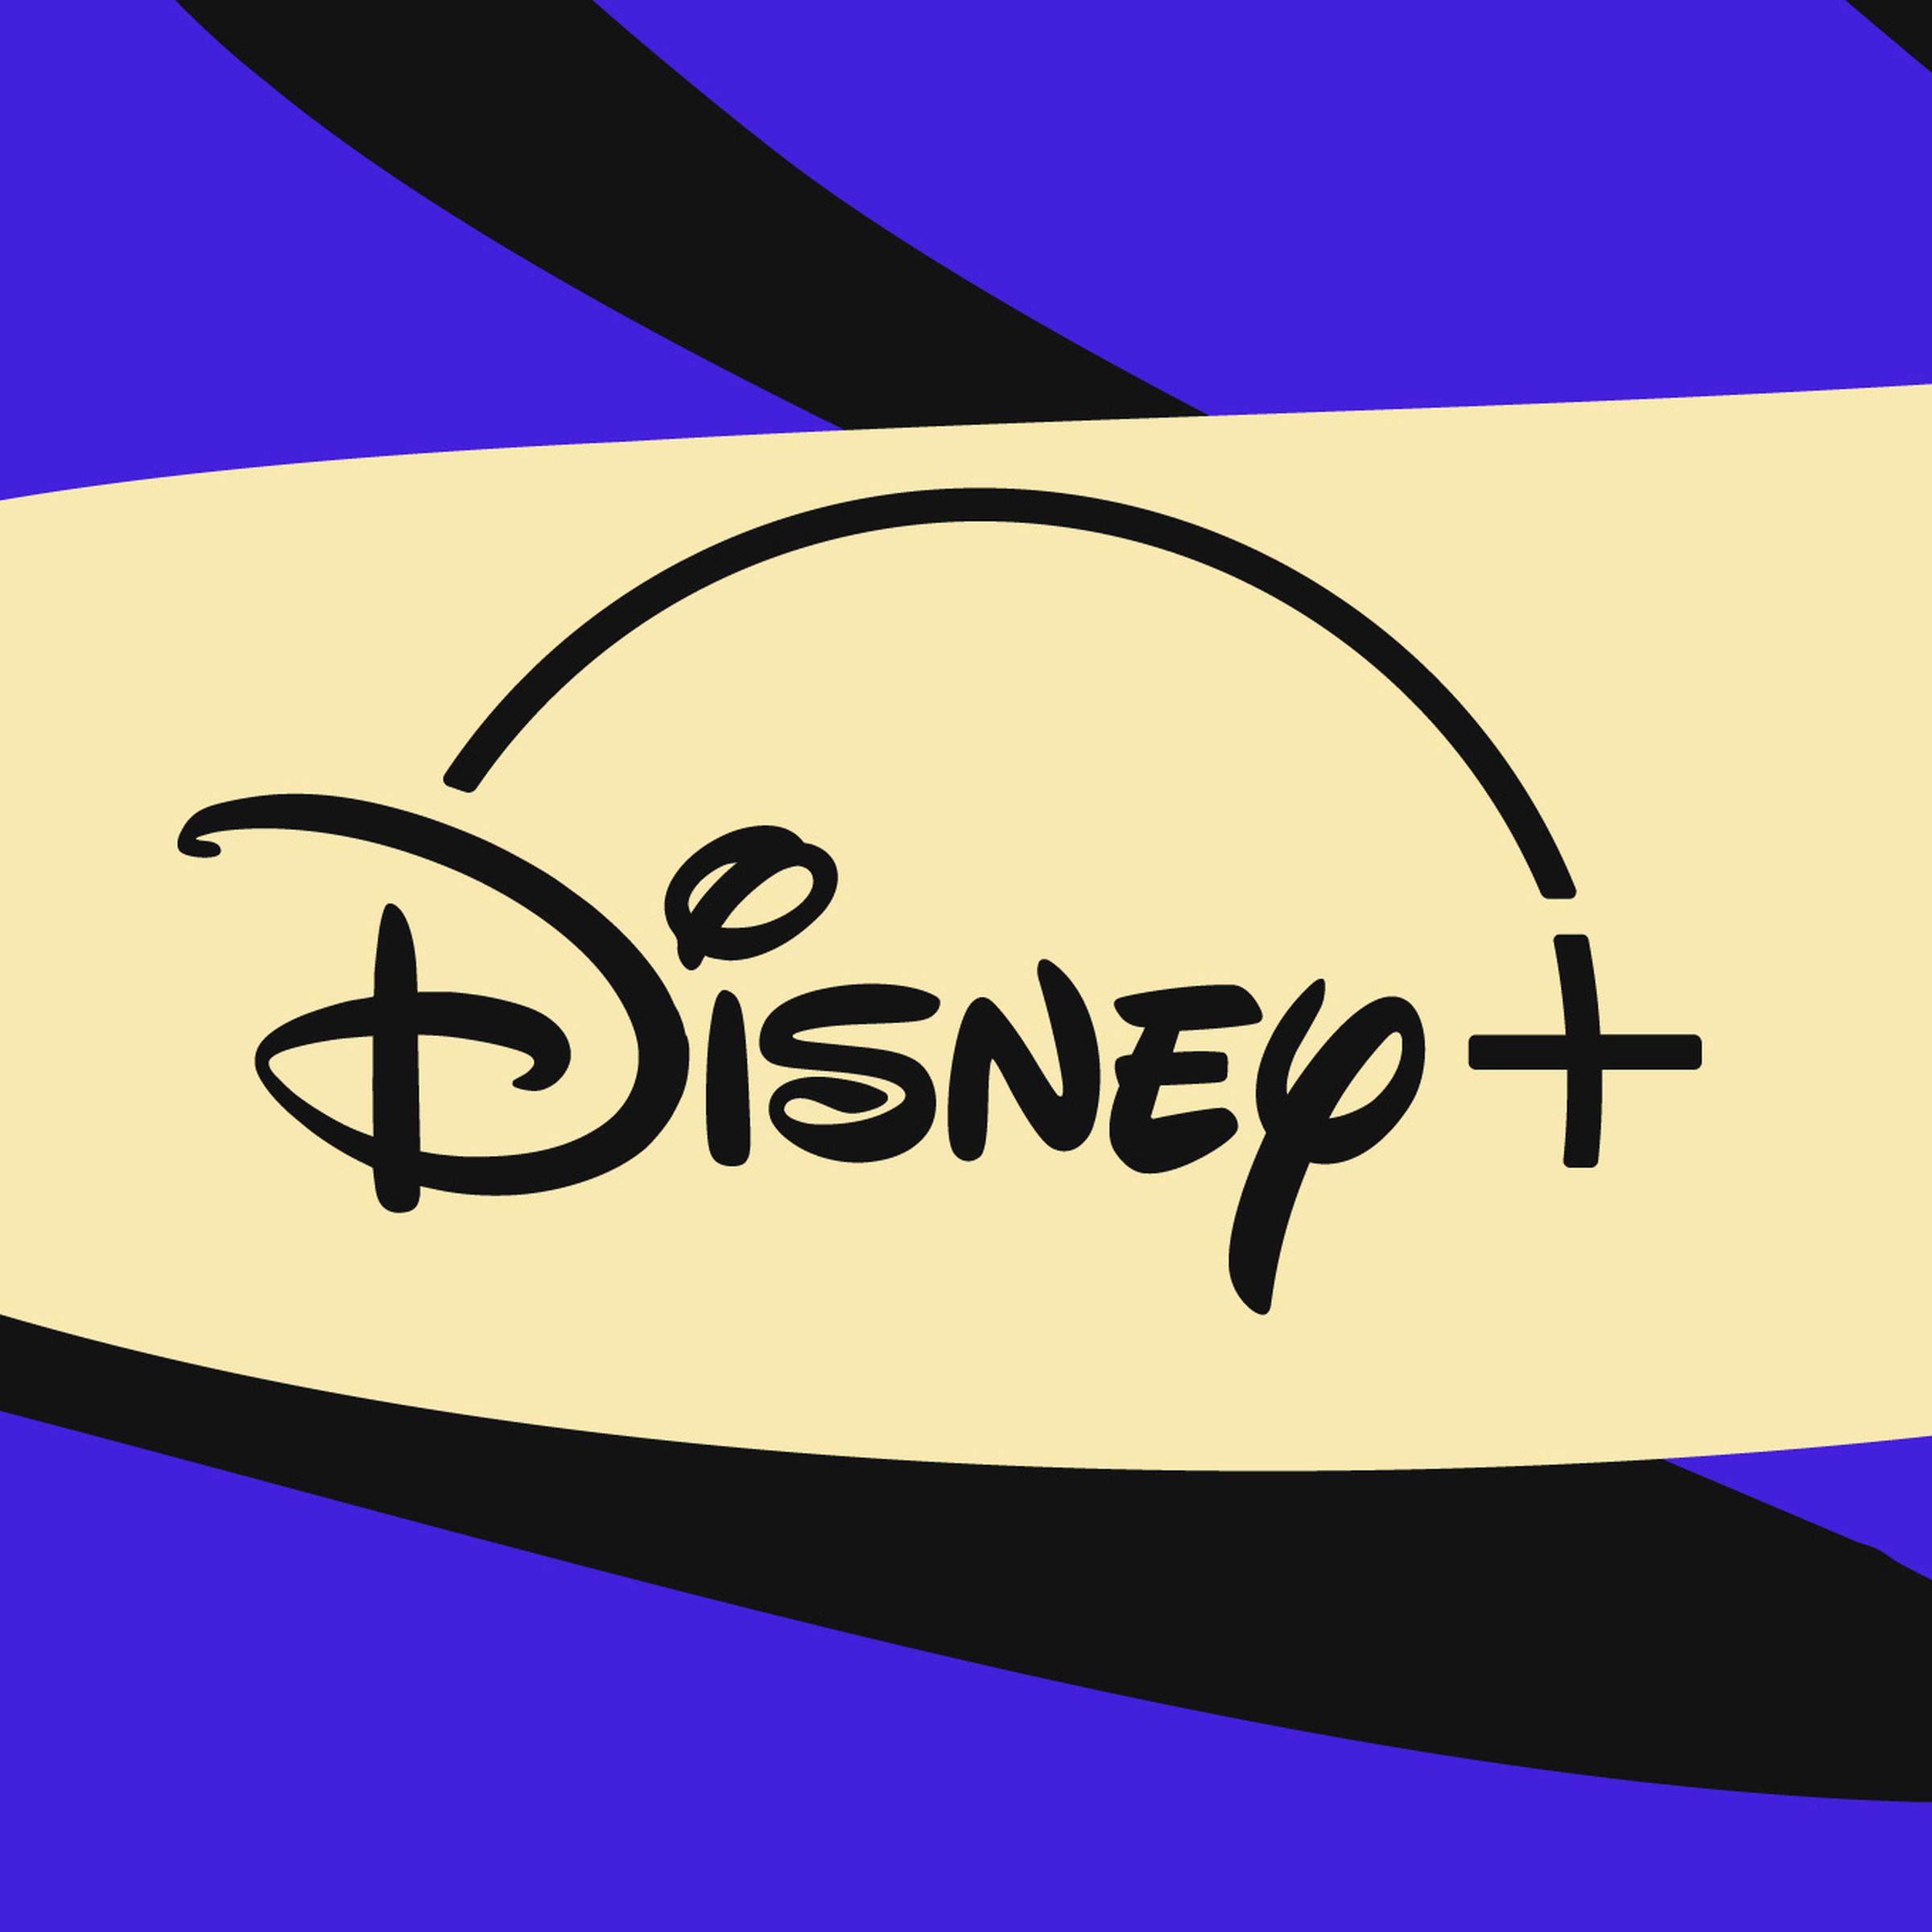 The Disney Plus logo on a beige and purple background